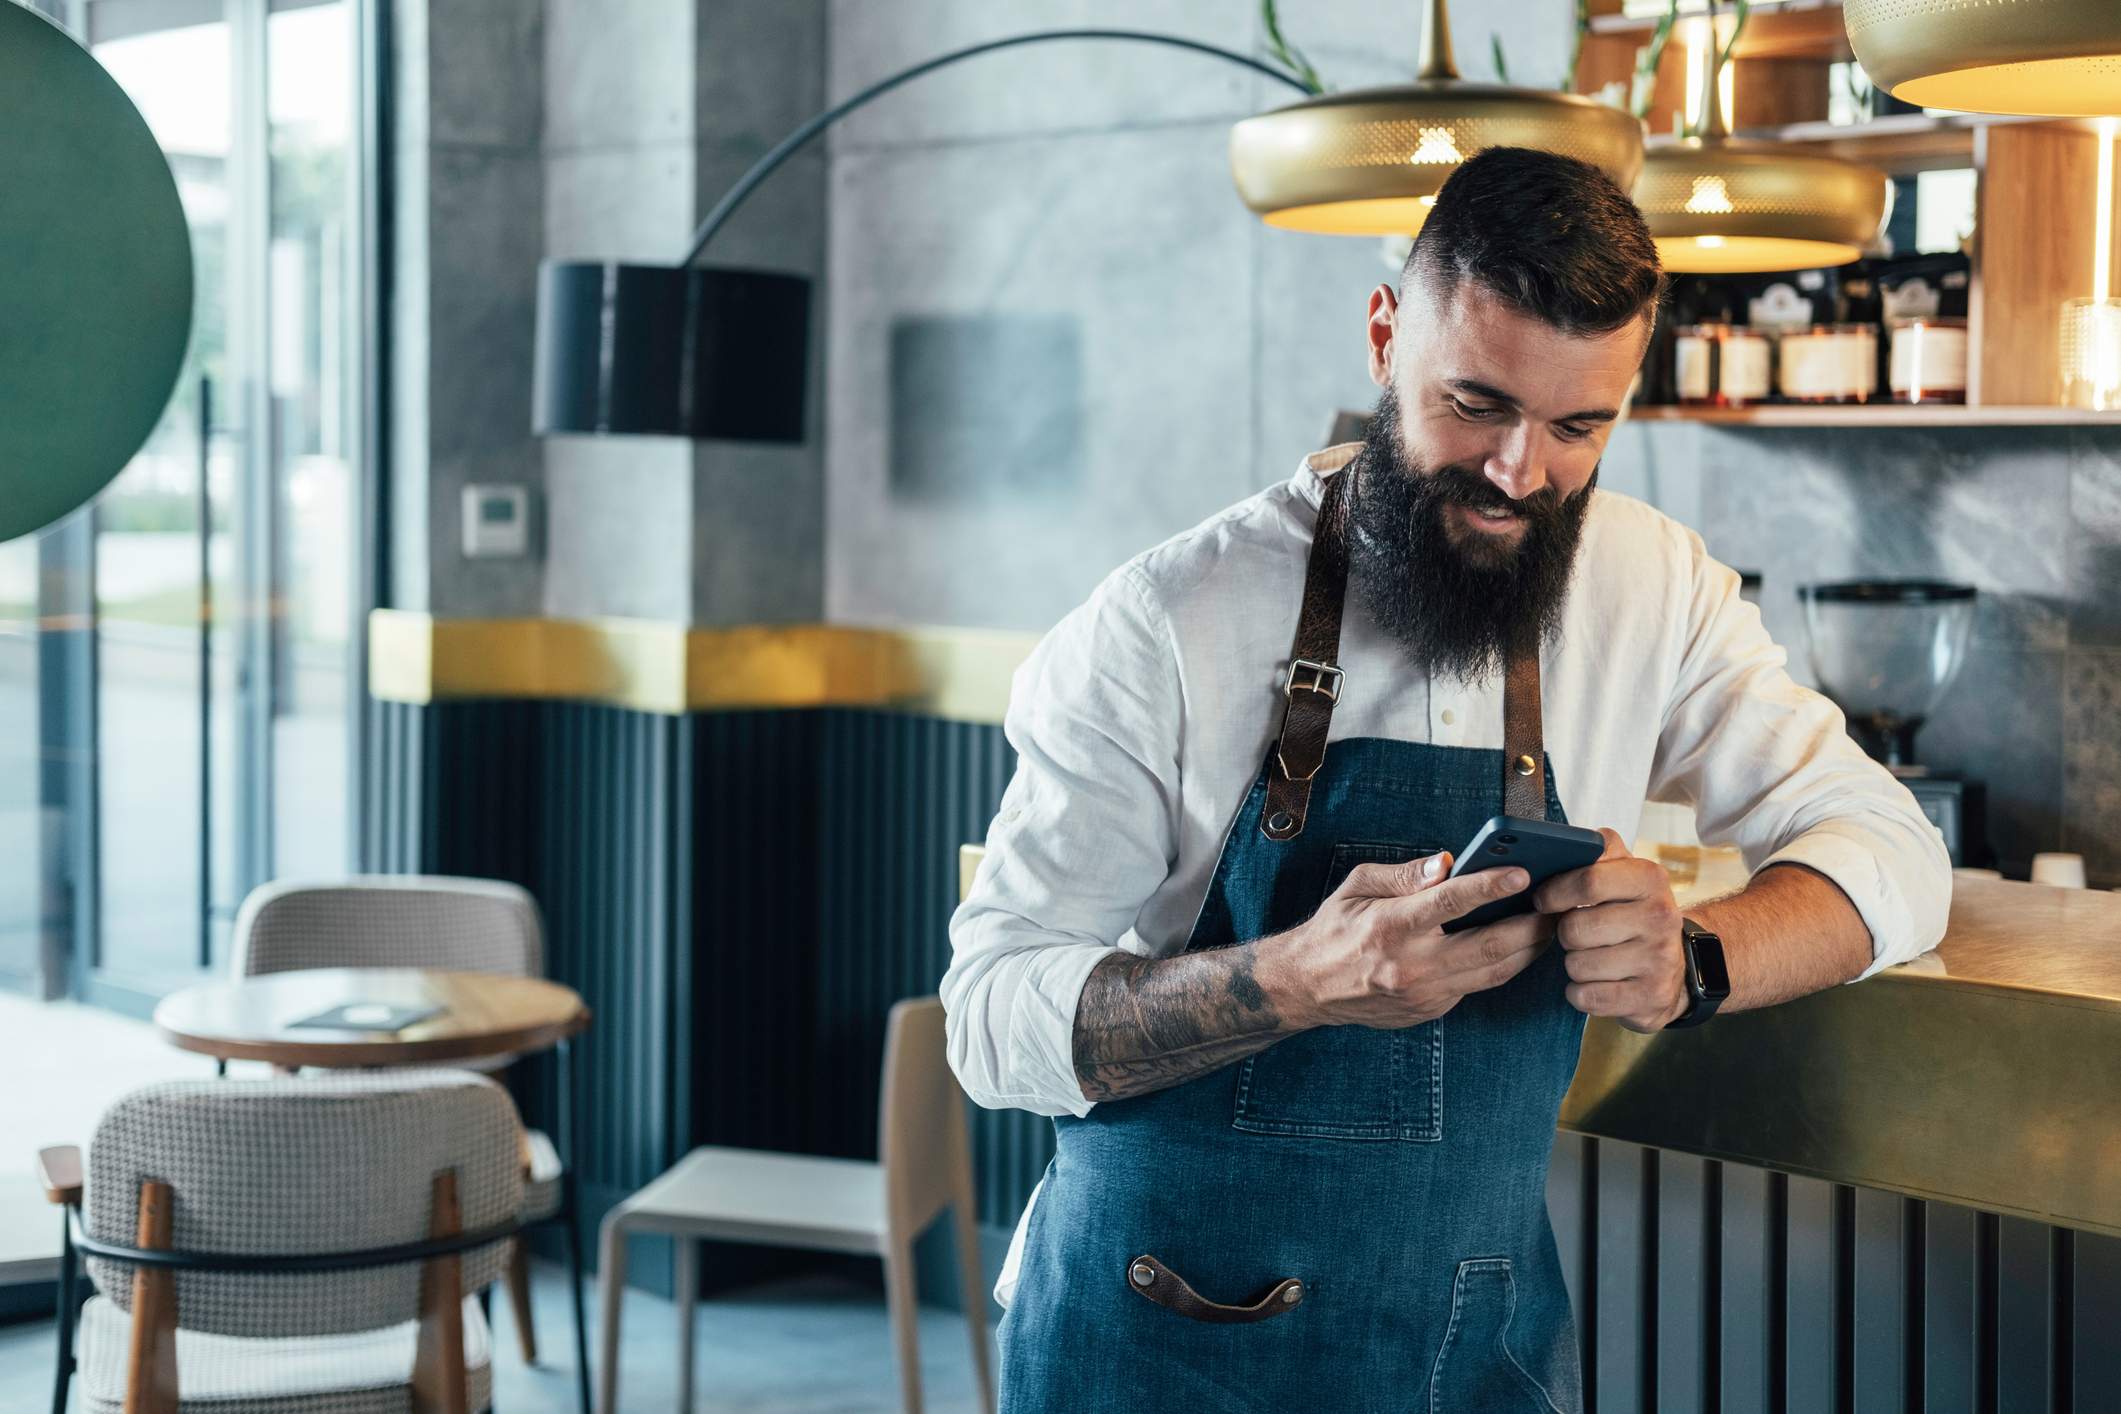 Image depicts a person leaning on a restaurant counter and utilizing their mobile phone.